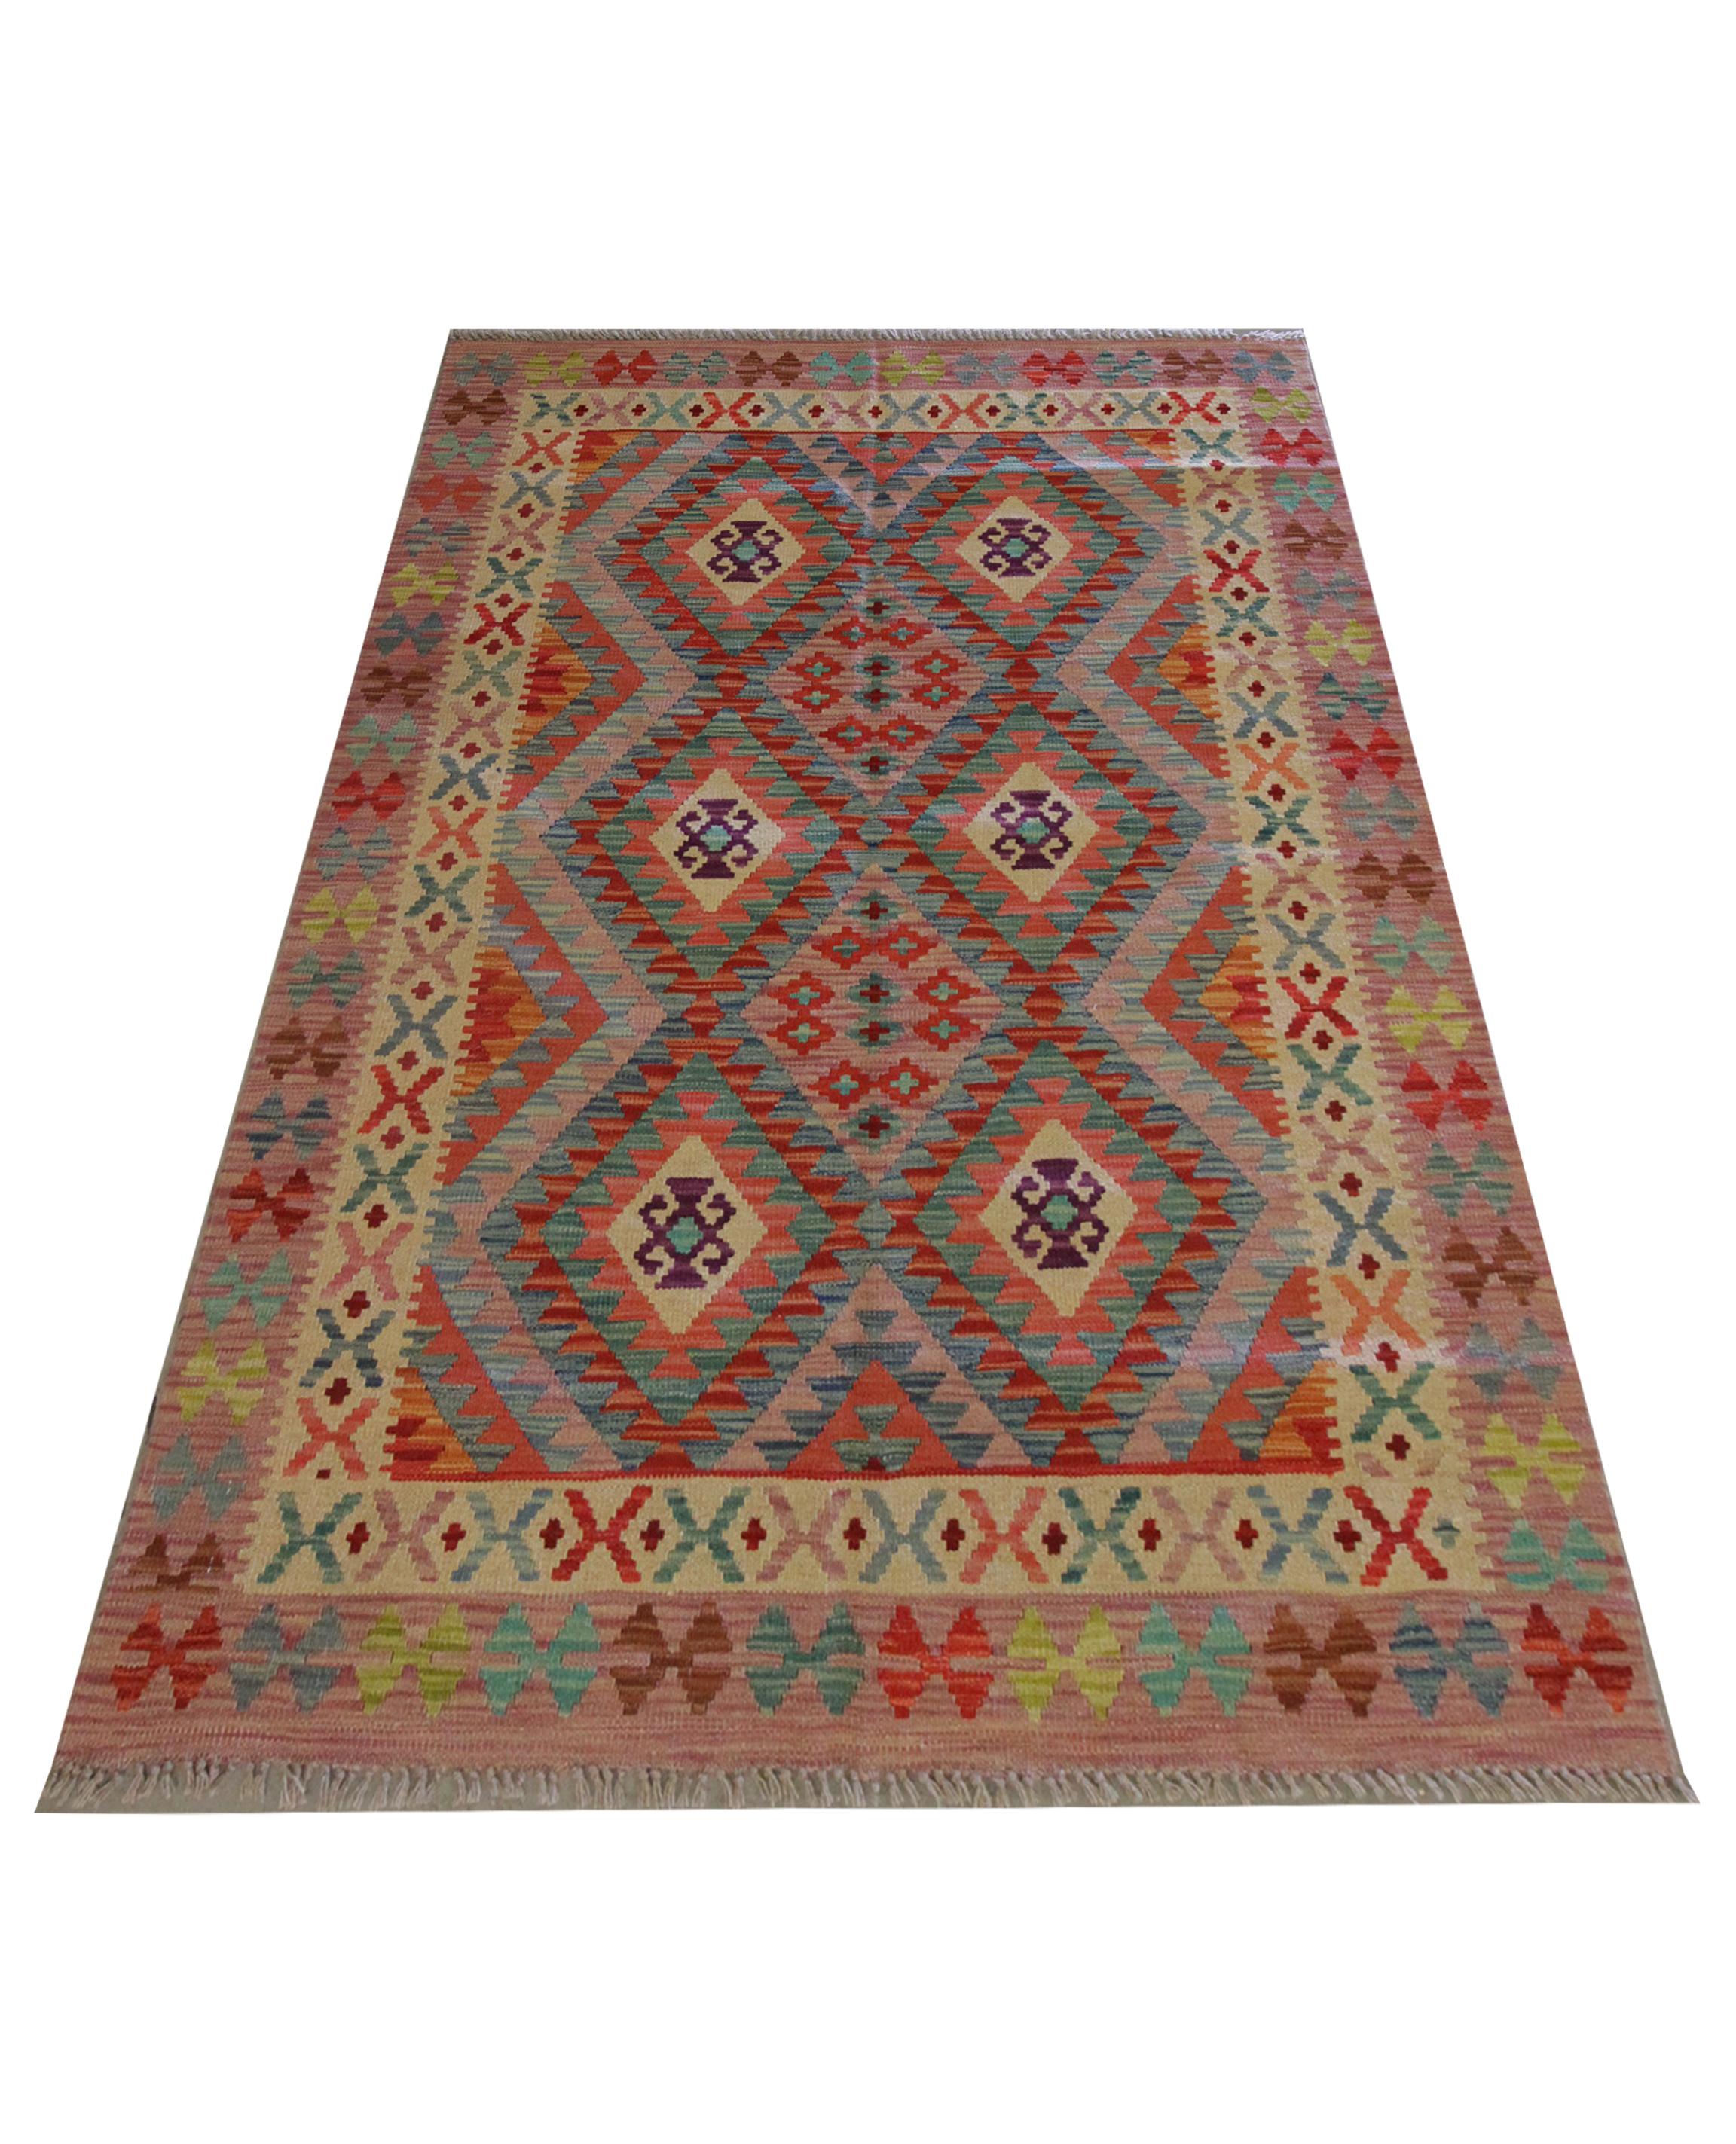 This alluring geometric kilim is a handwoven Afghan flatwoven carpet constructed in the early 21st century. The design is striking with diamond hook medallions woven symmetrically in a grid format in a rich colour palette, including blue, purple and